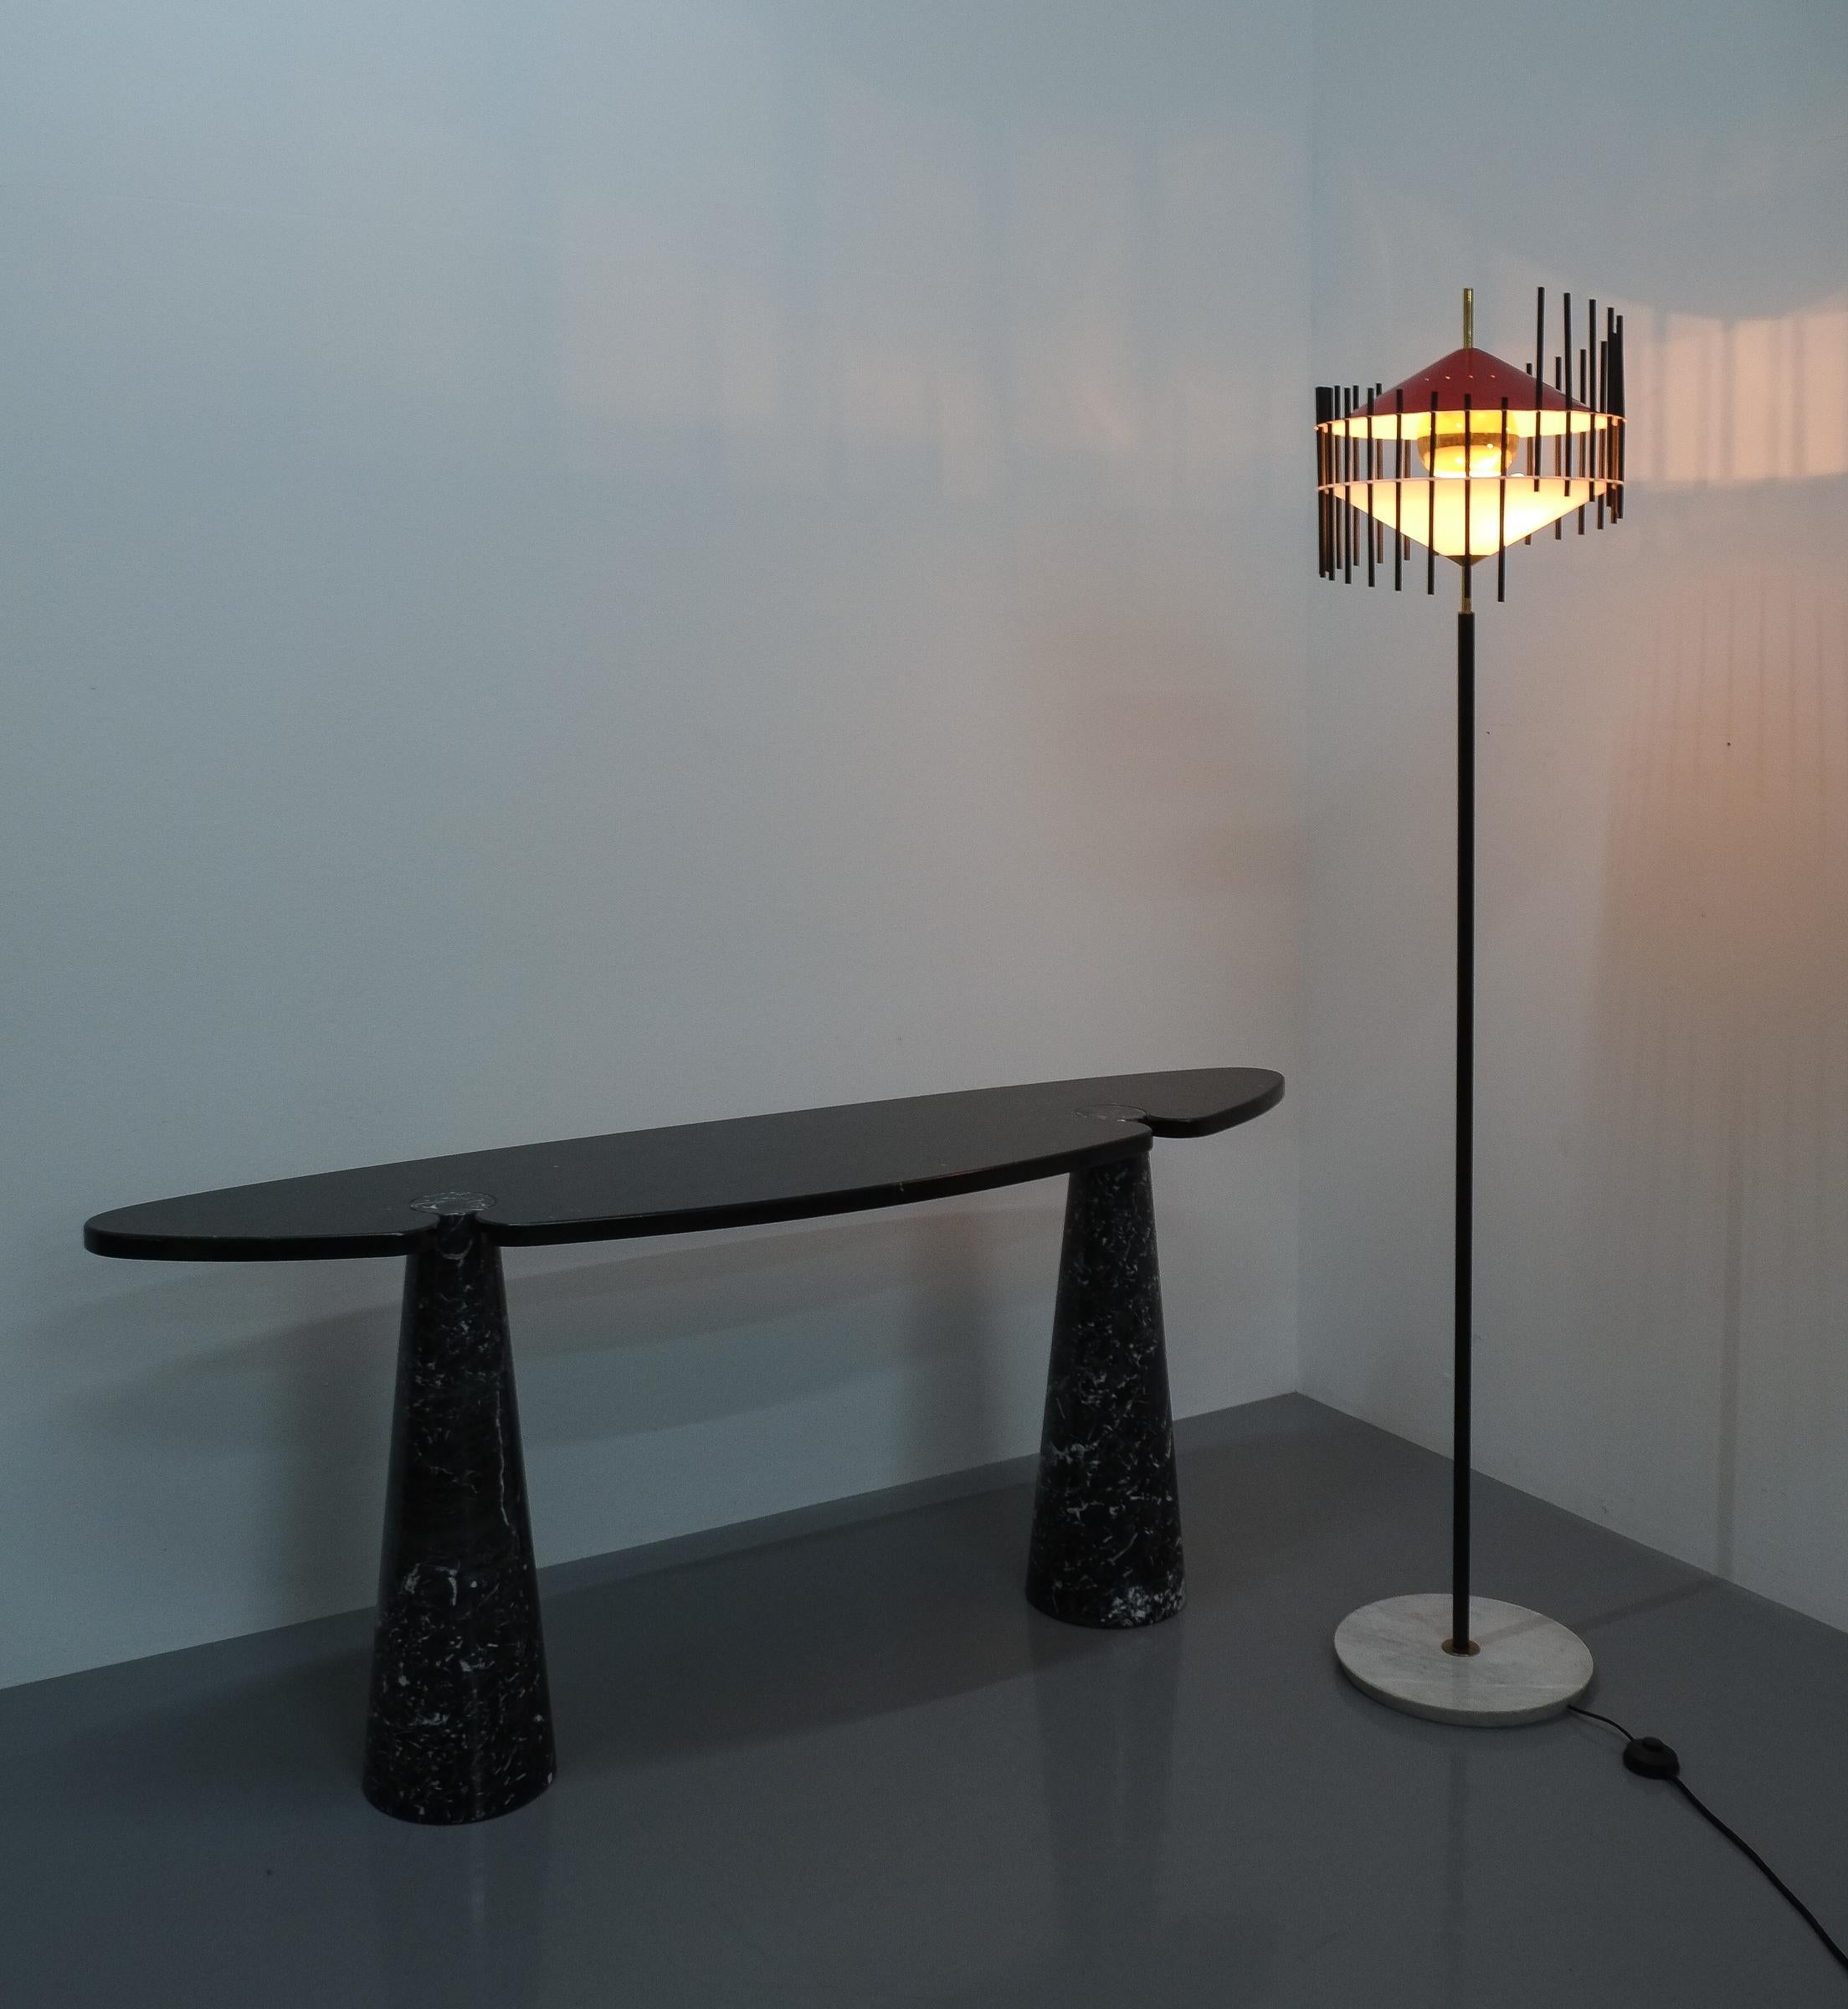 Angelo Brotto Floor Lamp for Esperia, Italy, circa 1955 In Good Condition For Sale In Vienna, AT